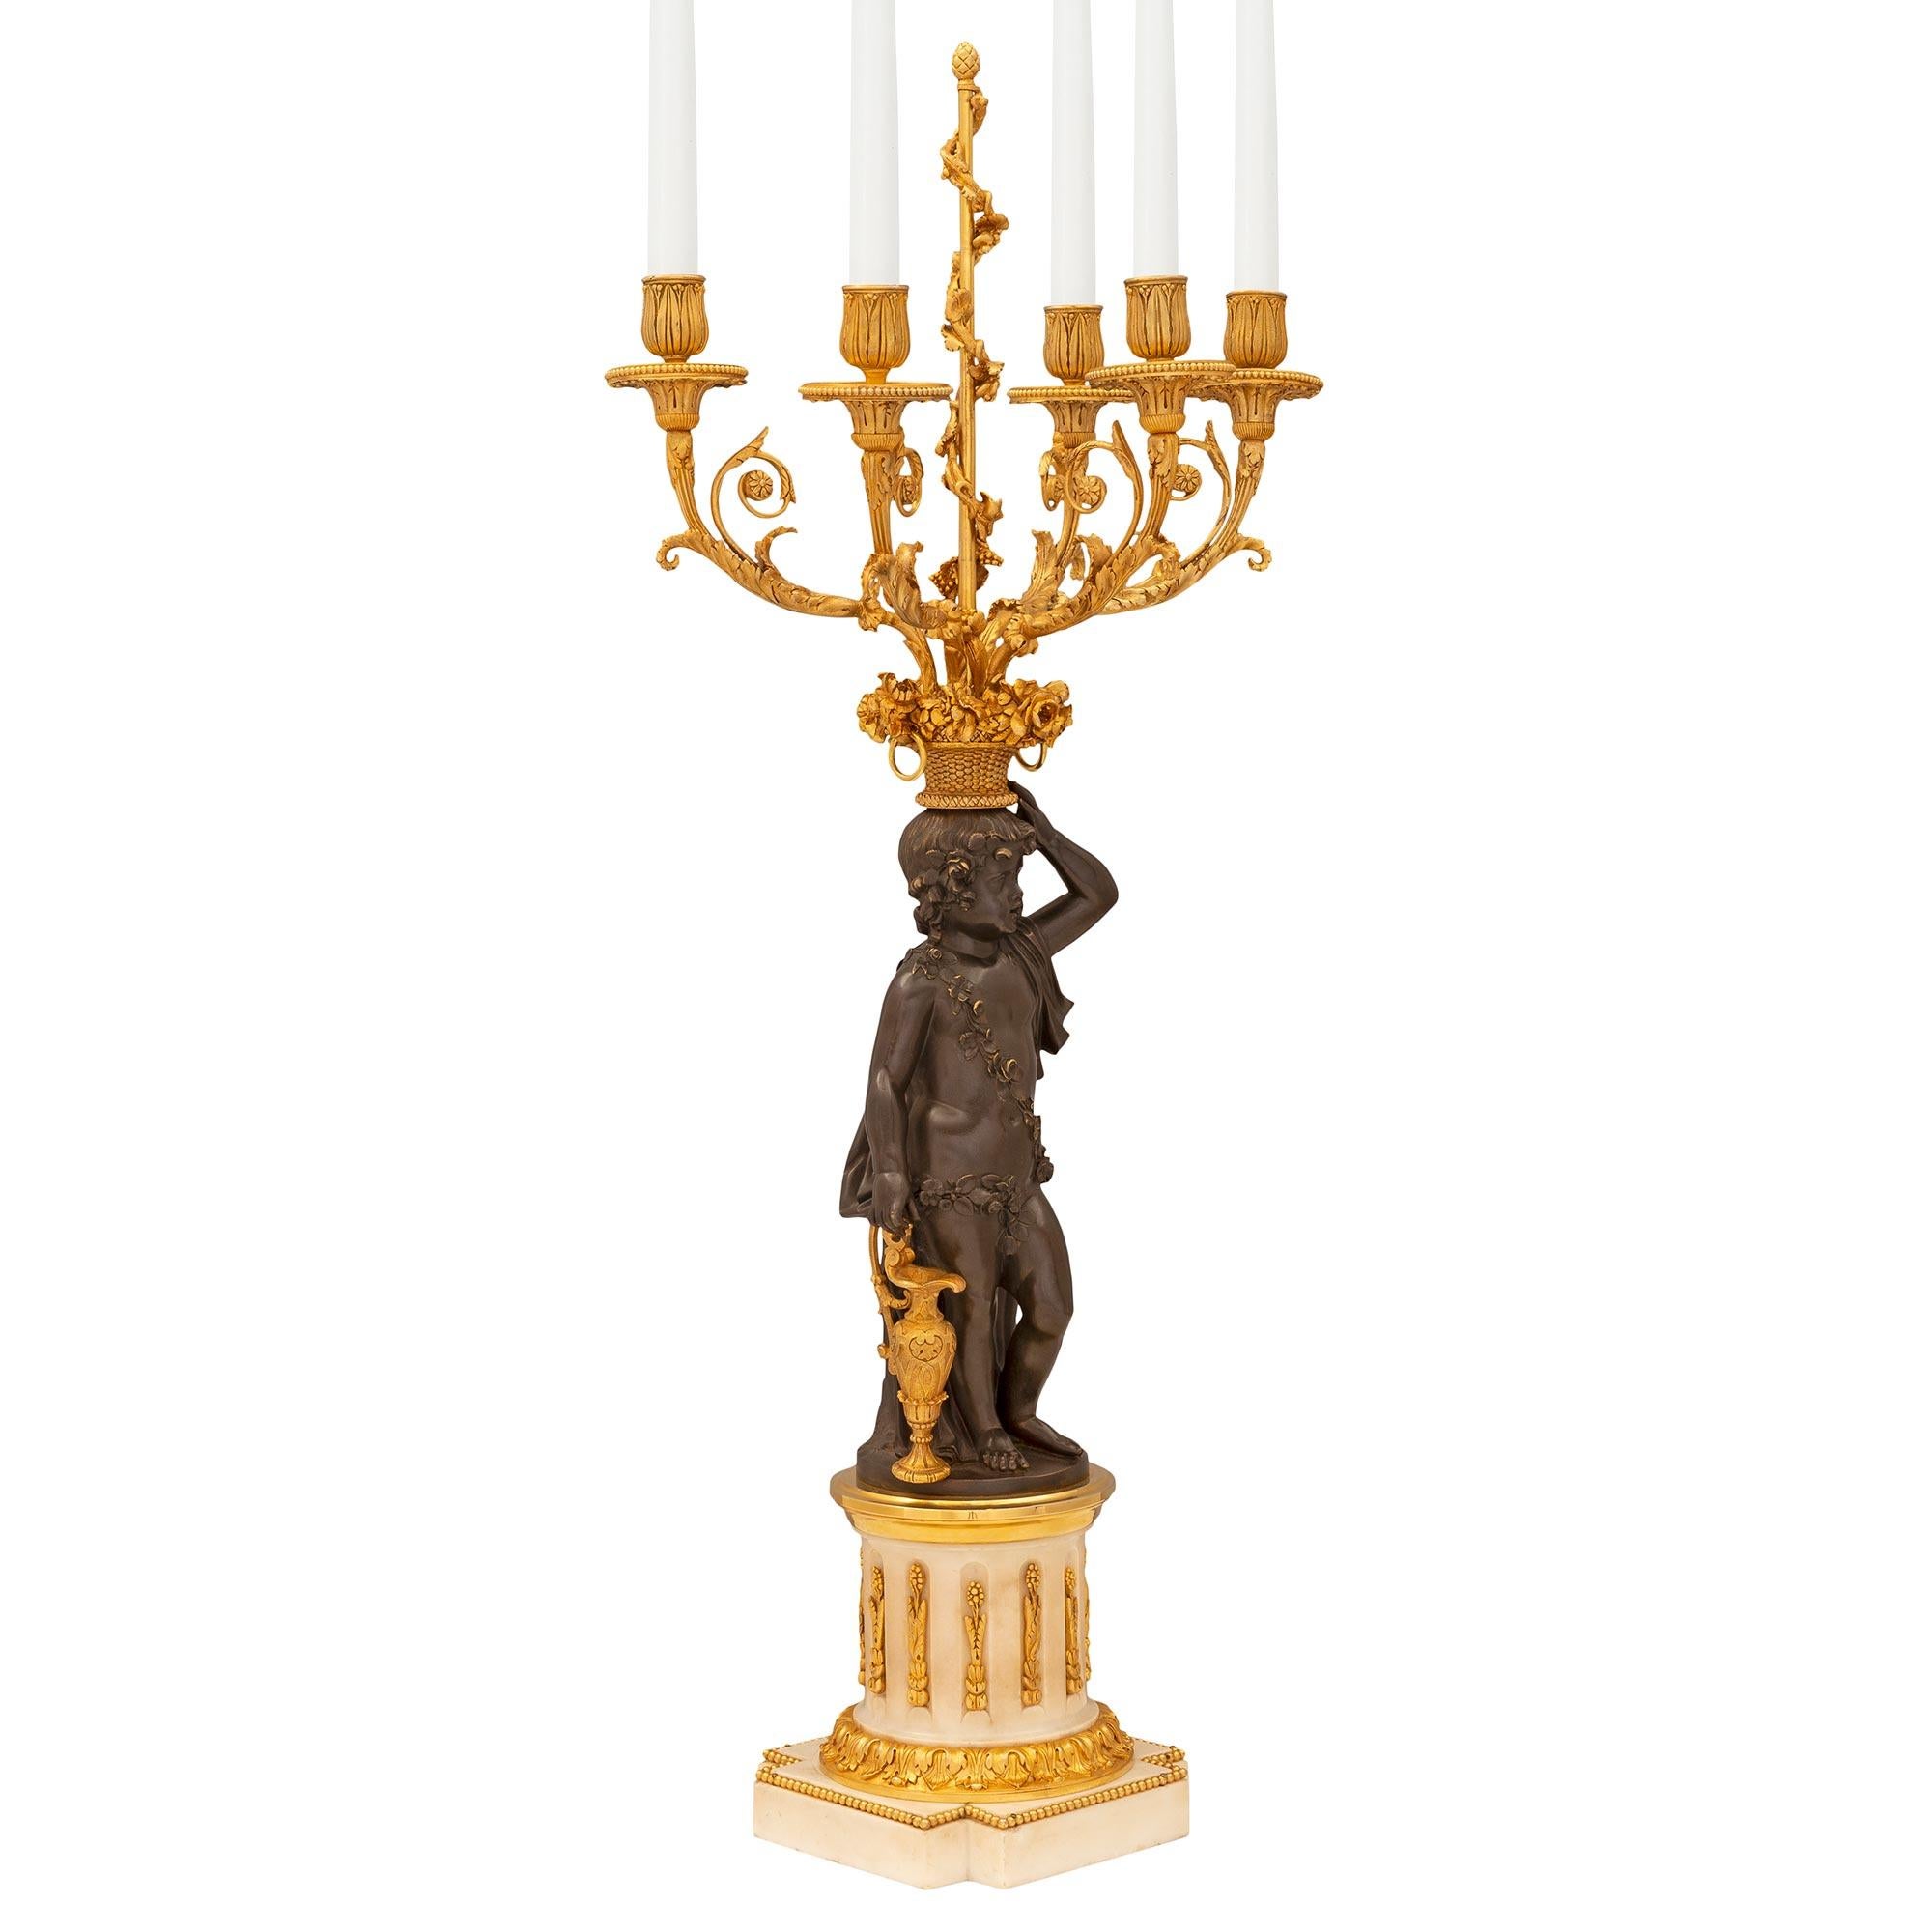 An exceptional and very high quality pair of French early 19th century Louis XVI st. patinated bronze, ormolu, and white Carrara marble candelabras circa 1805. Each five arm candelabra is raised by a square white Carrara marble base with cut corners